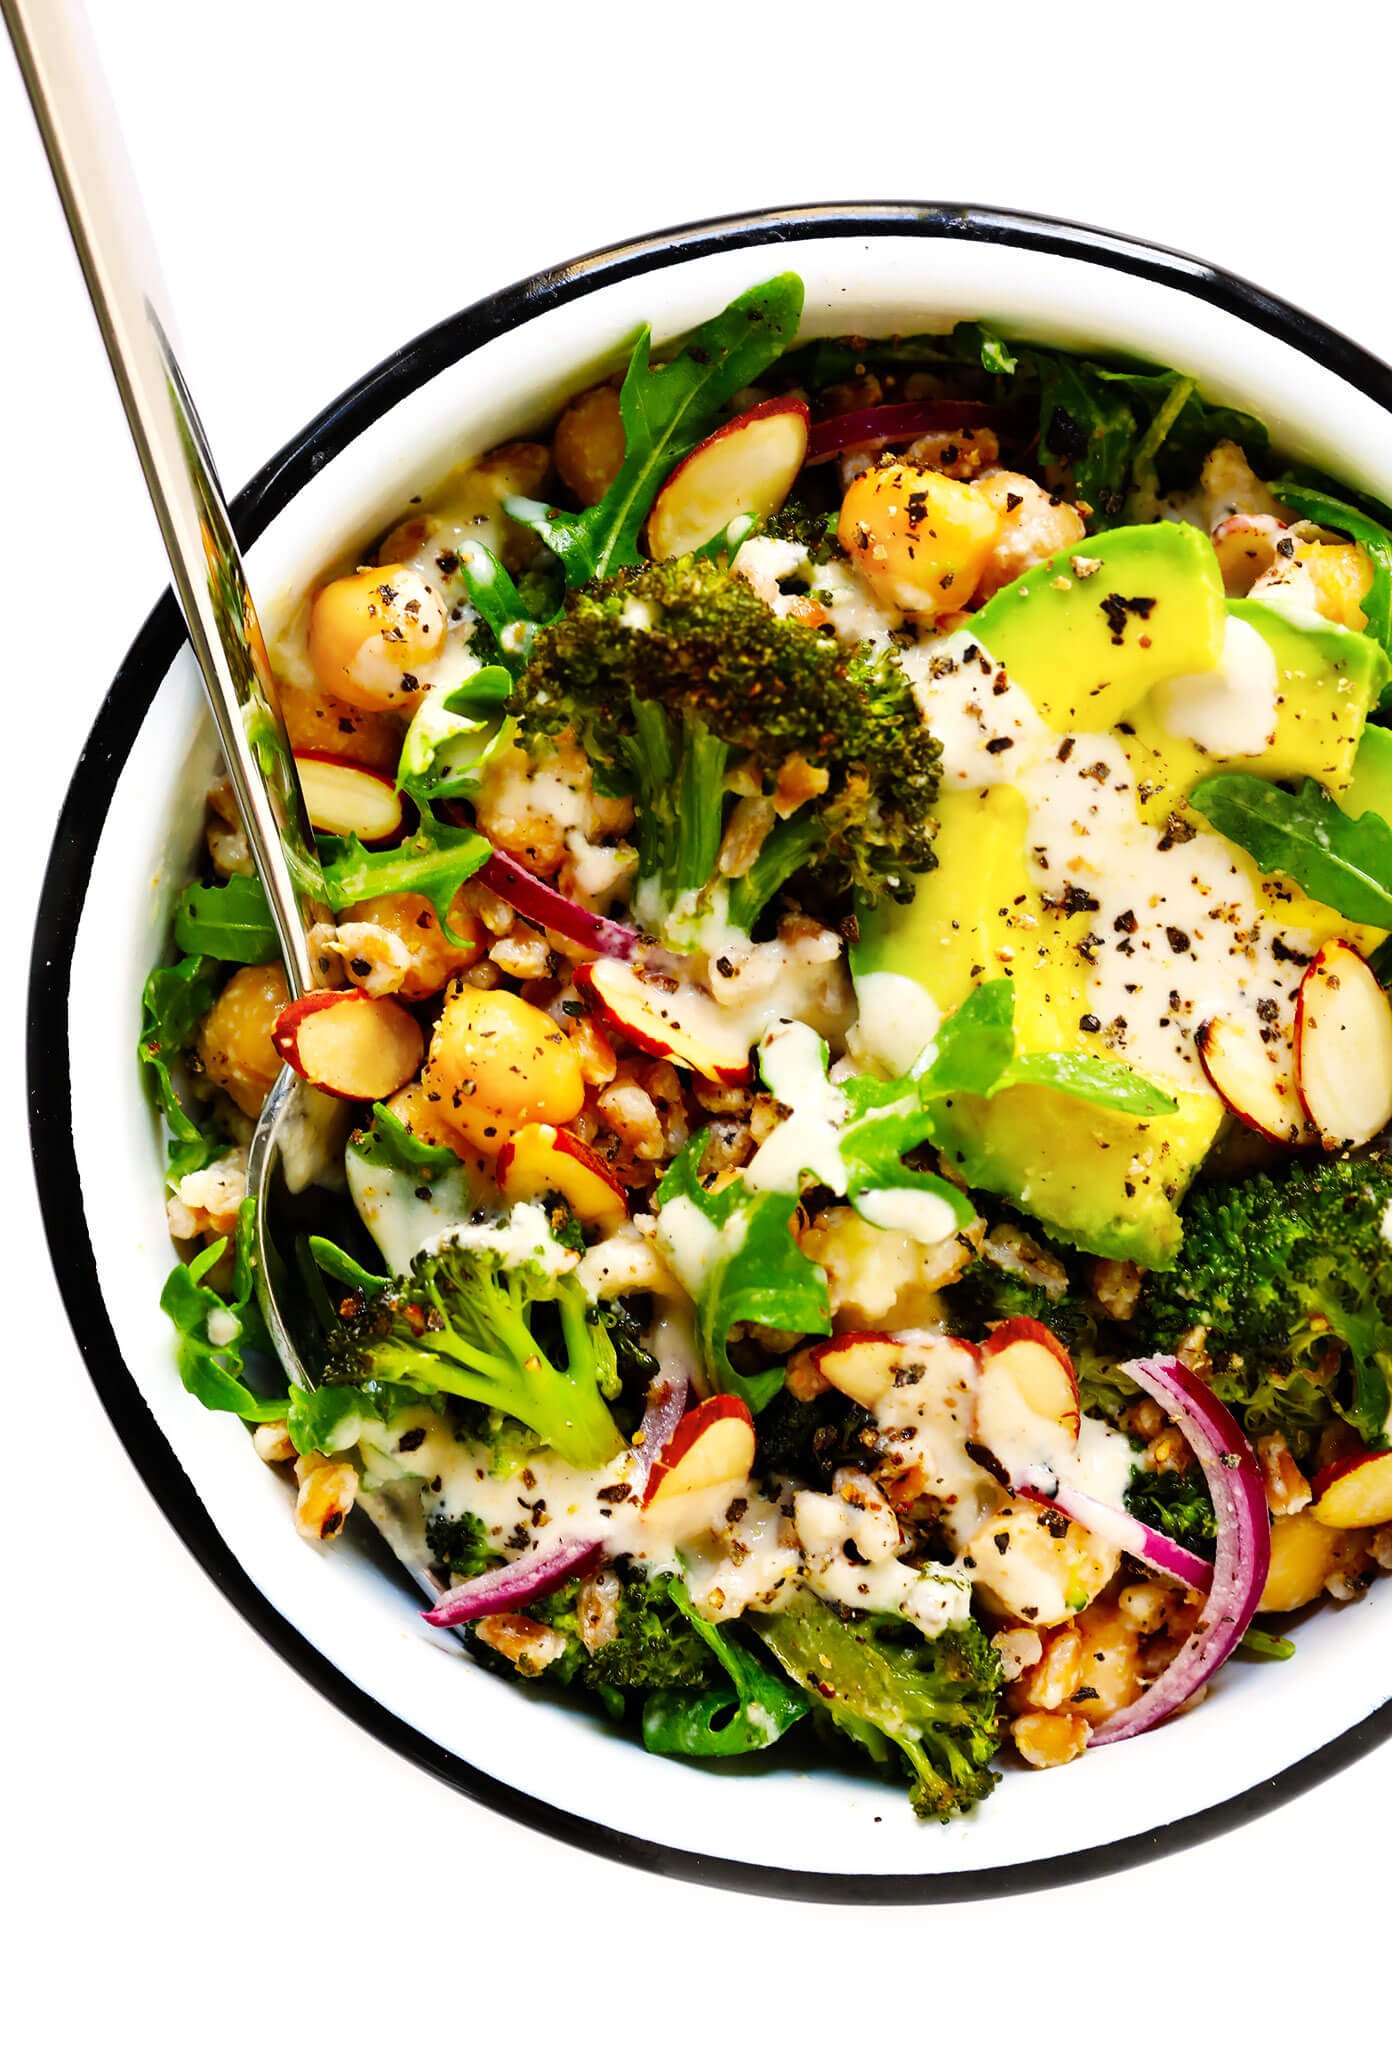 Roasted Broccoli and Farro Bowls via Gimme Some Oven